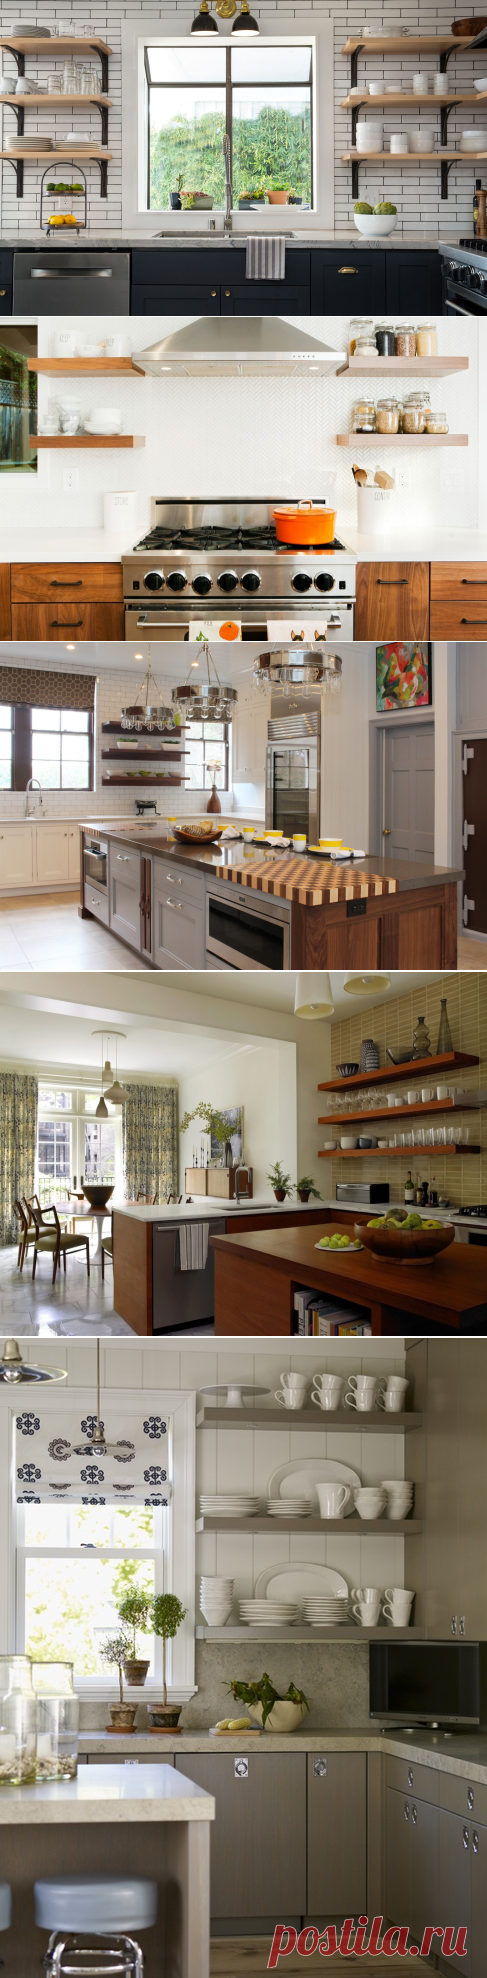 25 Kitchens with Open Shelving - Inspiration - Dering Hall